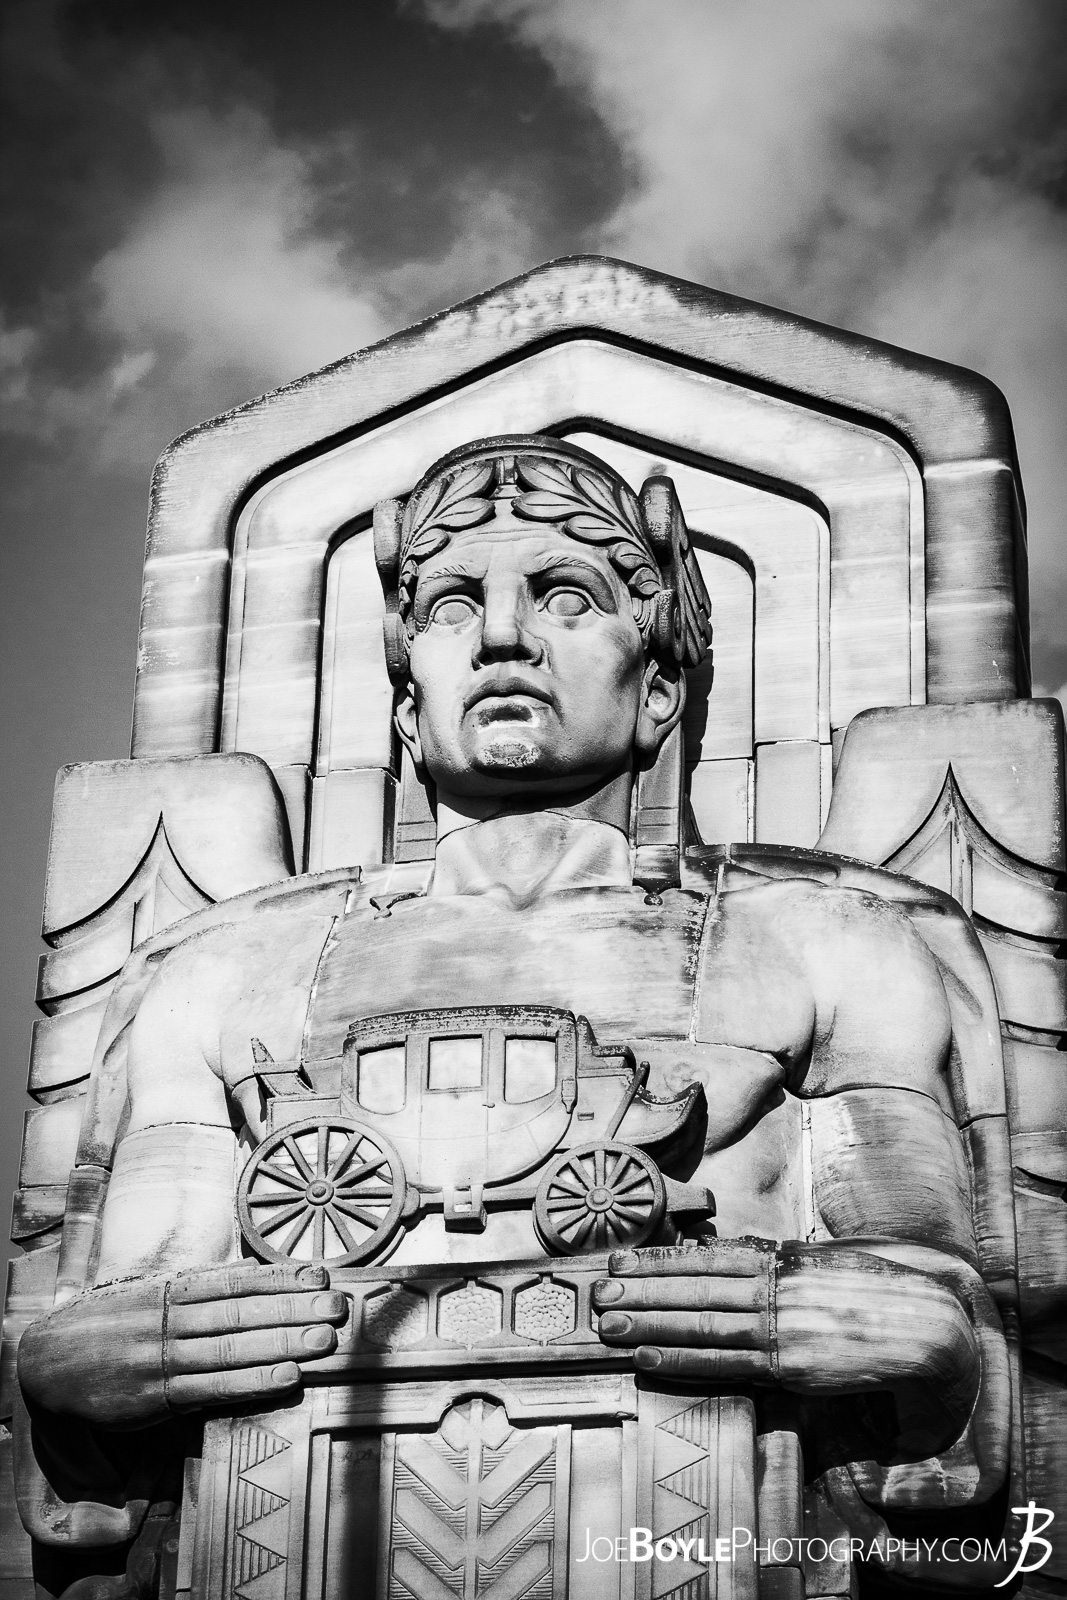  This statue and others like it are found on the Hope Memorial Bridge, formerly called the Lorain-Carnegie Bridge. Here is more information about the Hope Memorial Bridge. 